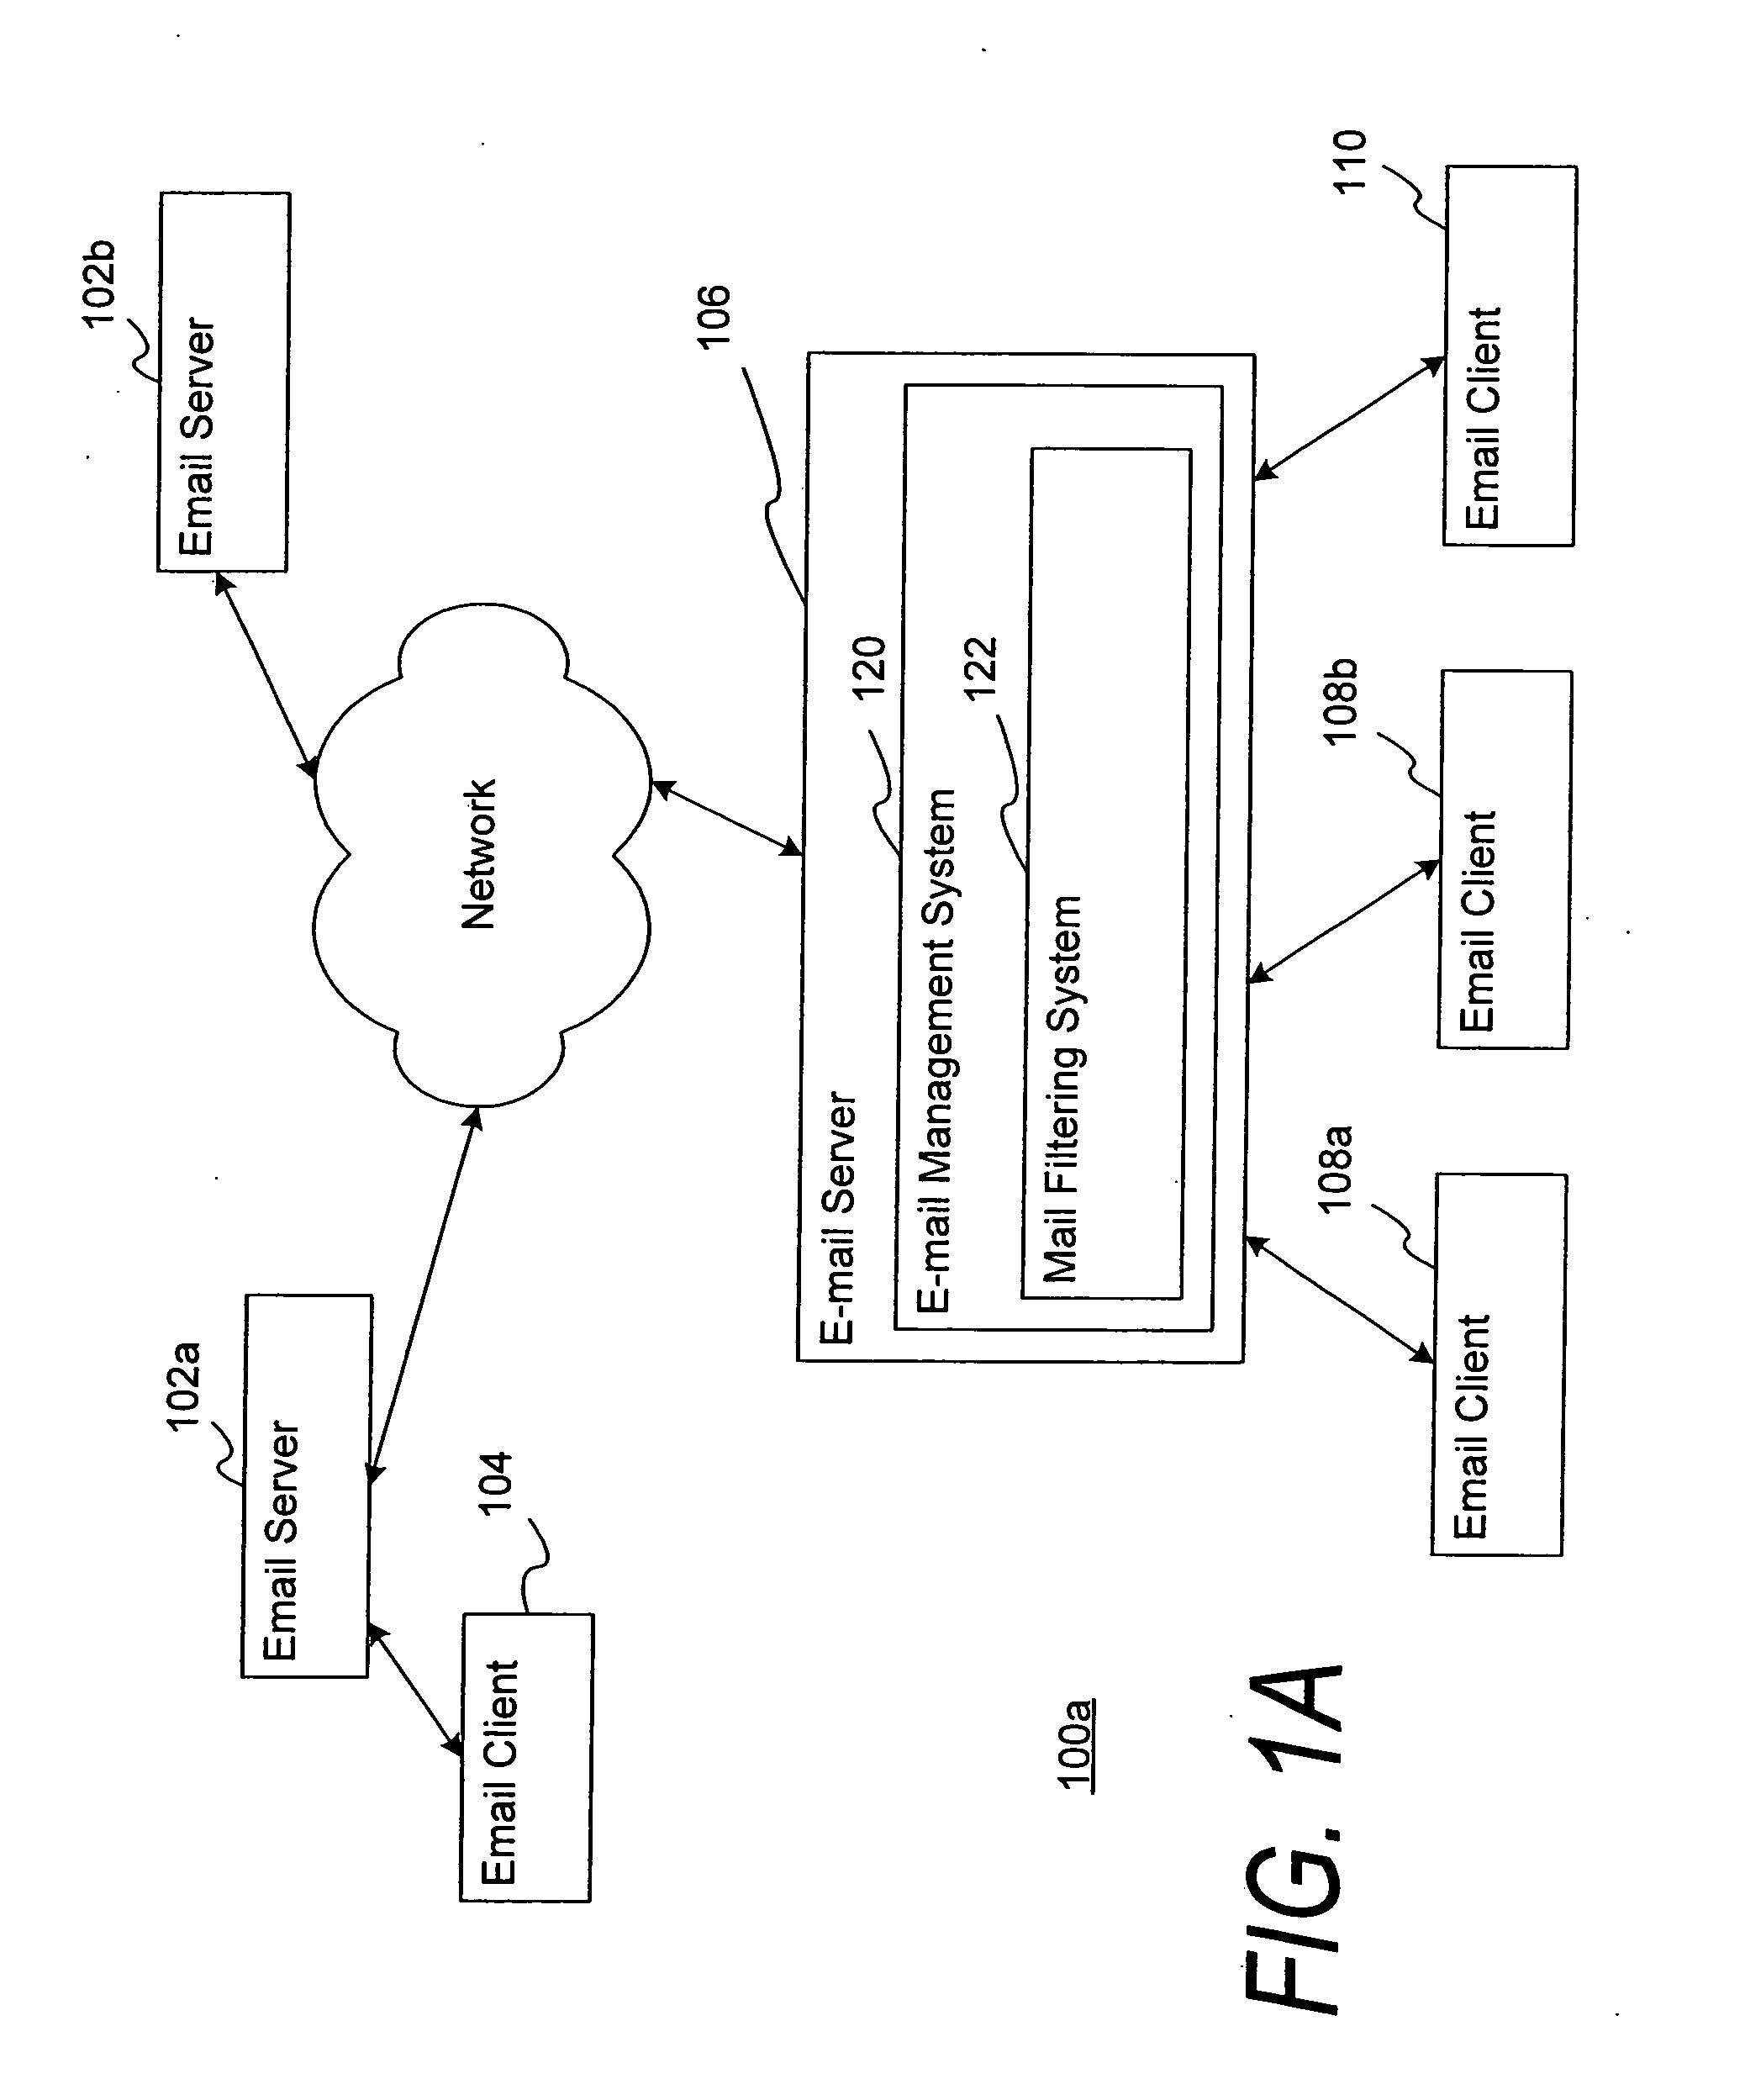 Filtering and managing electronic mail